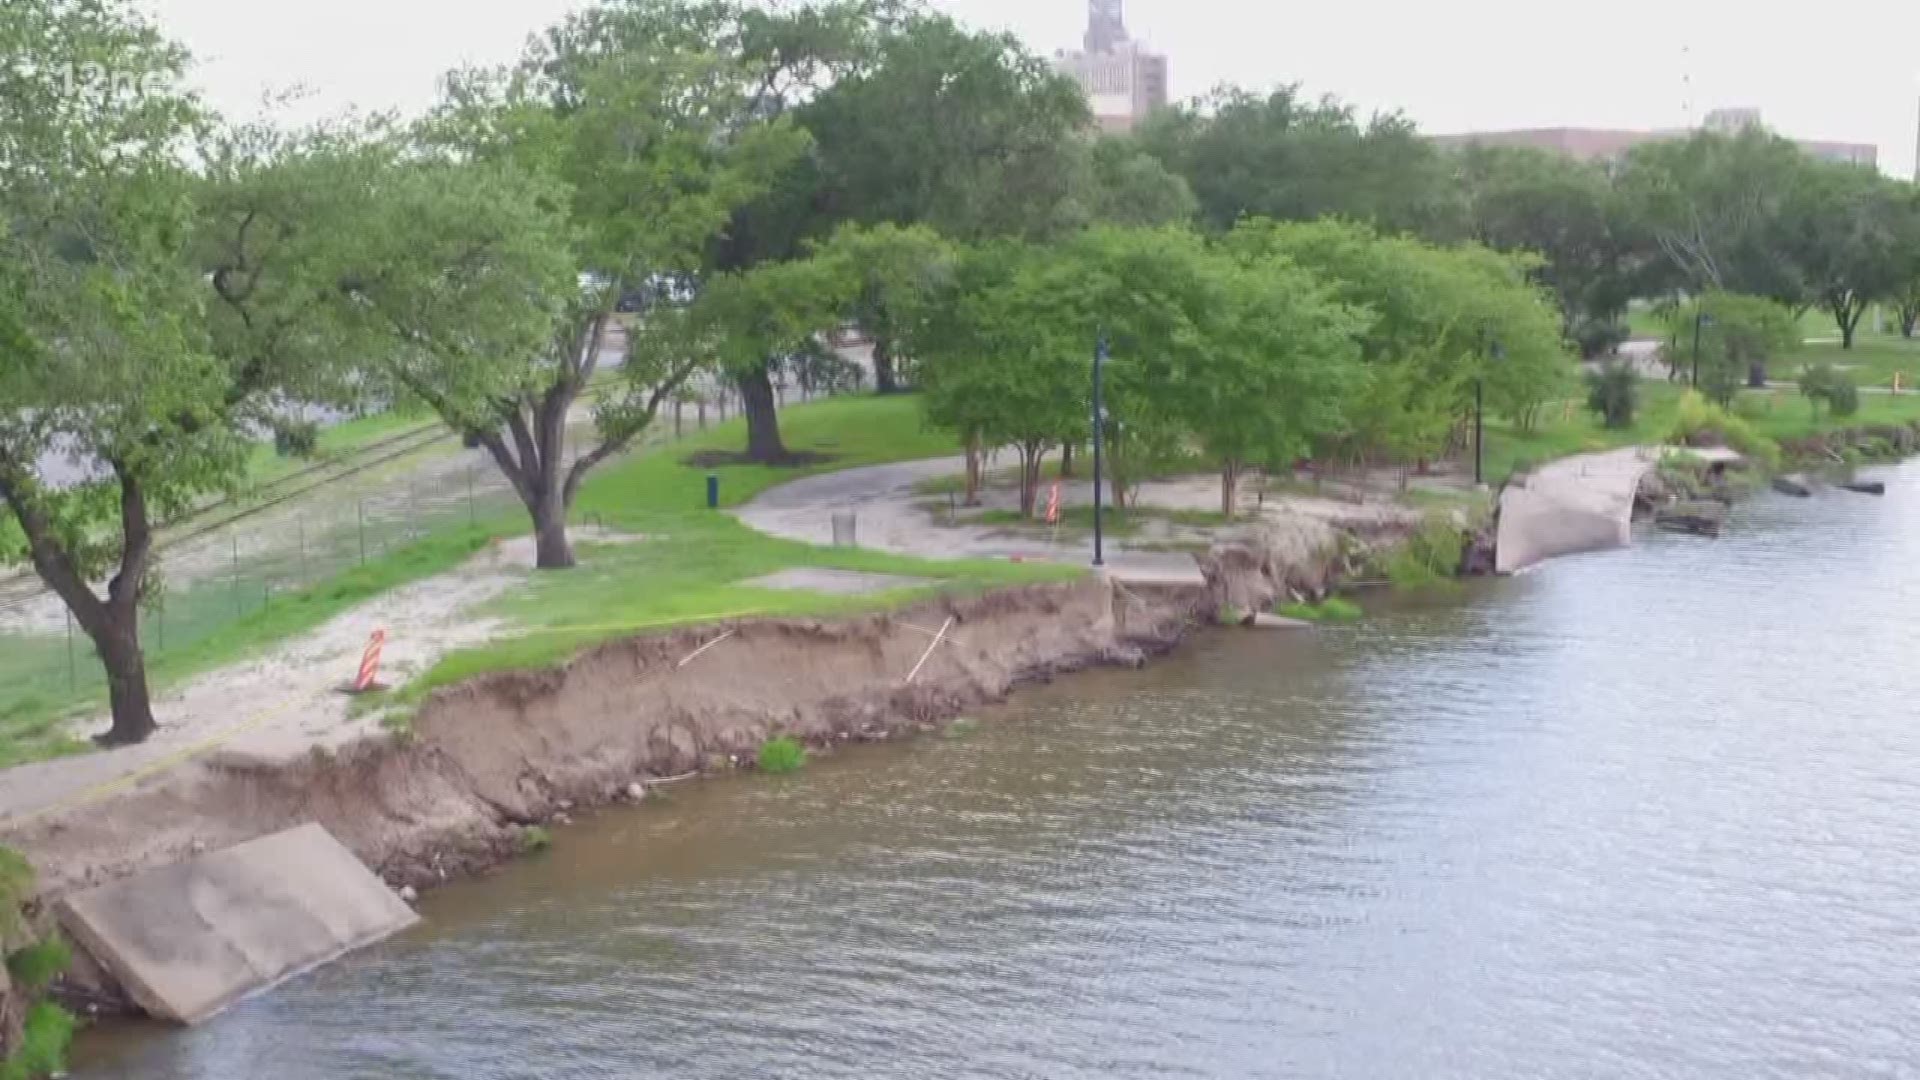 Beaumont councilman Mike Getz is defending his decision to reach out to FEMA to question the process of revamping Riverfront Park.